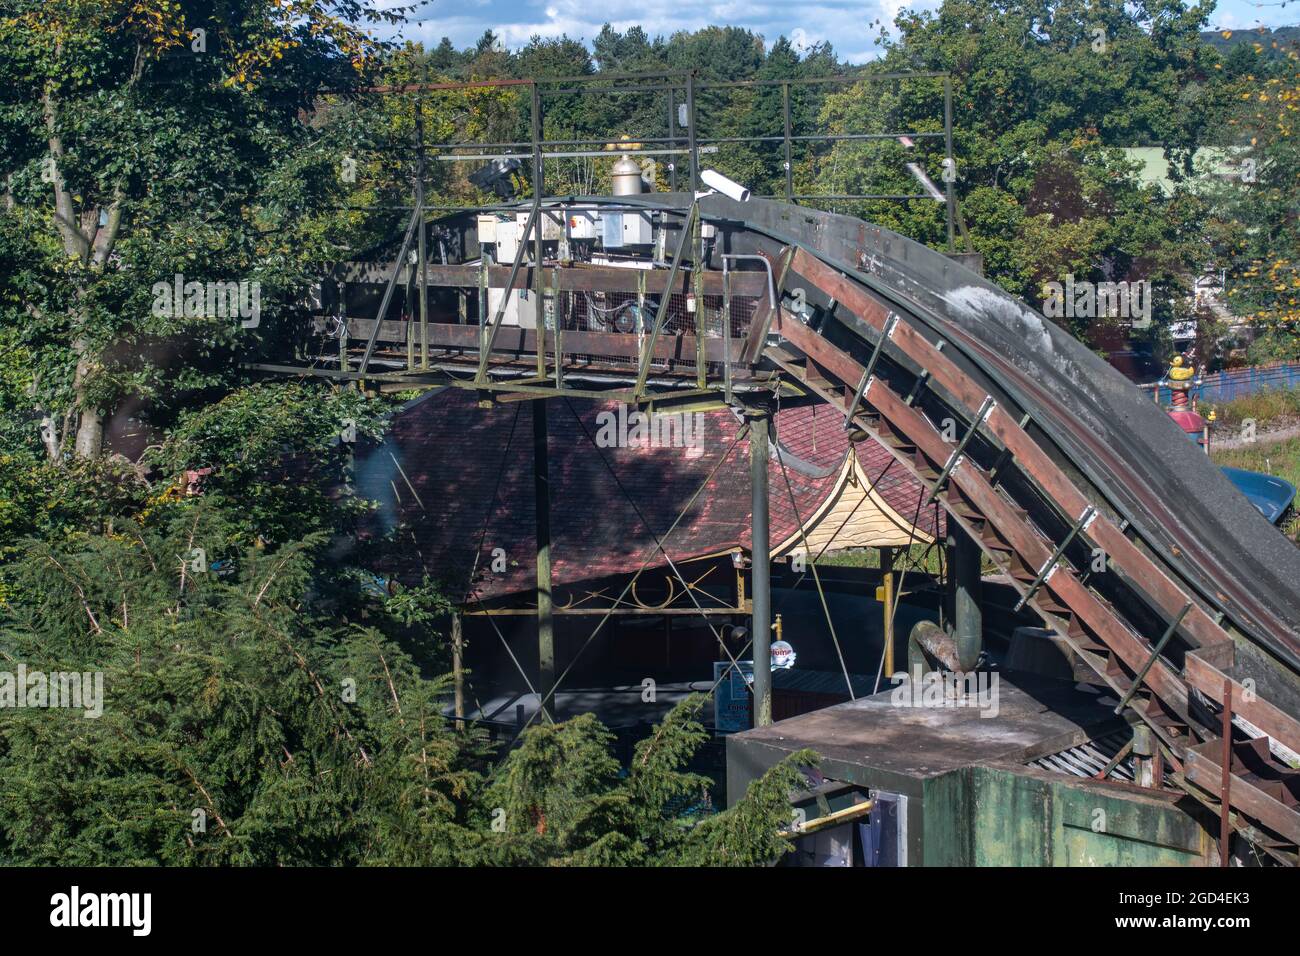 the disused and abandoned Alton Towers Log Flume shortly before it was pulled down to make way for the Wickerman Stock Photo